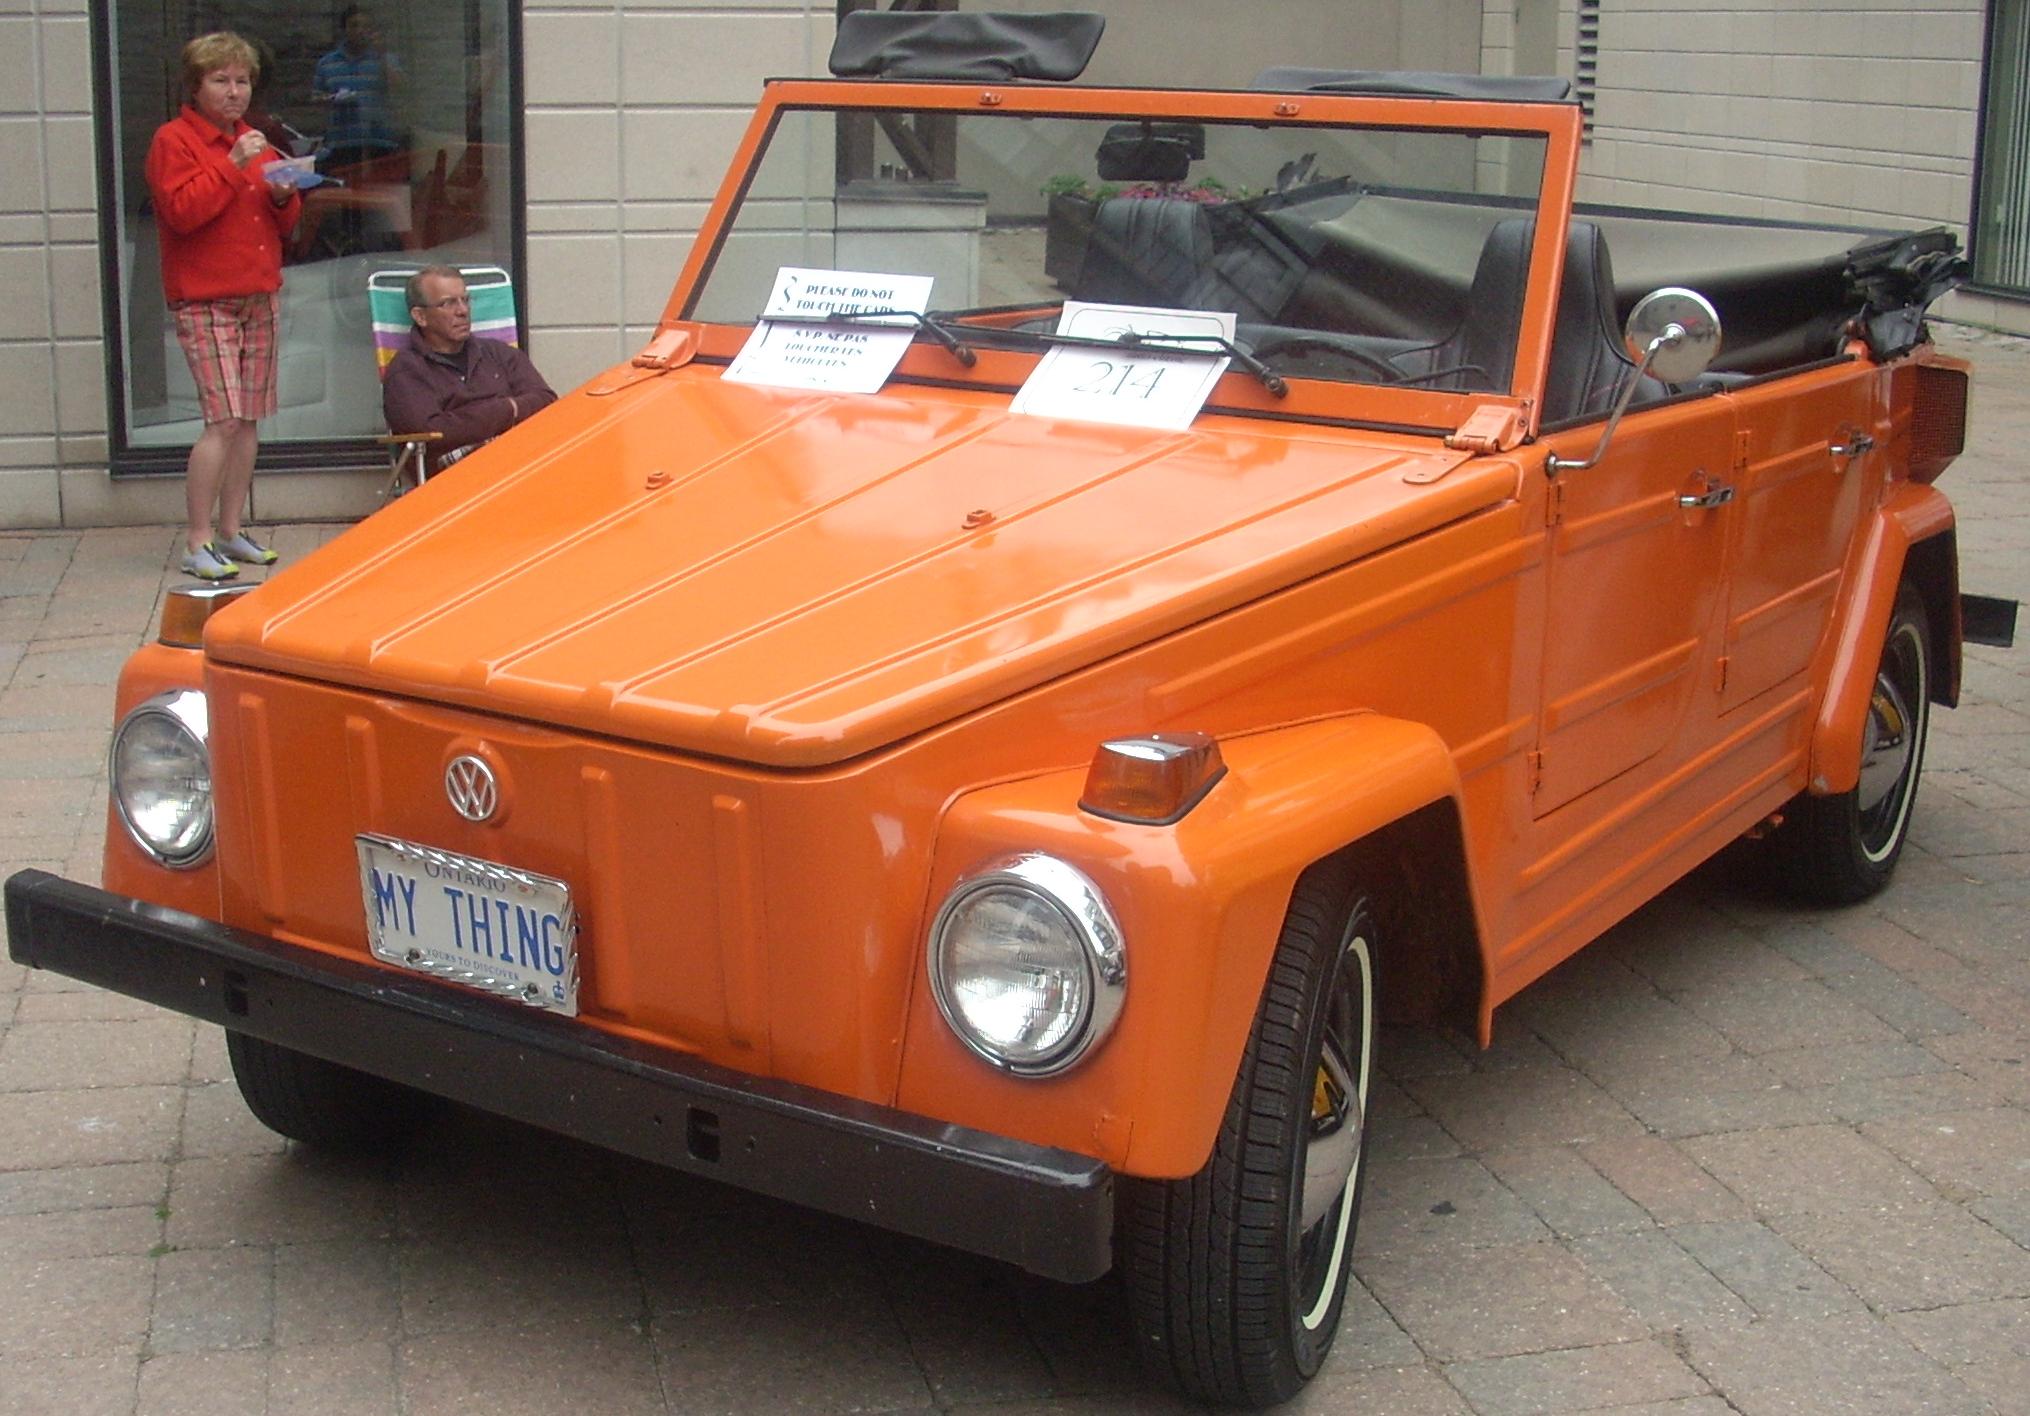 File:Volkswagen Thing (Byward Auto Classic).jpg